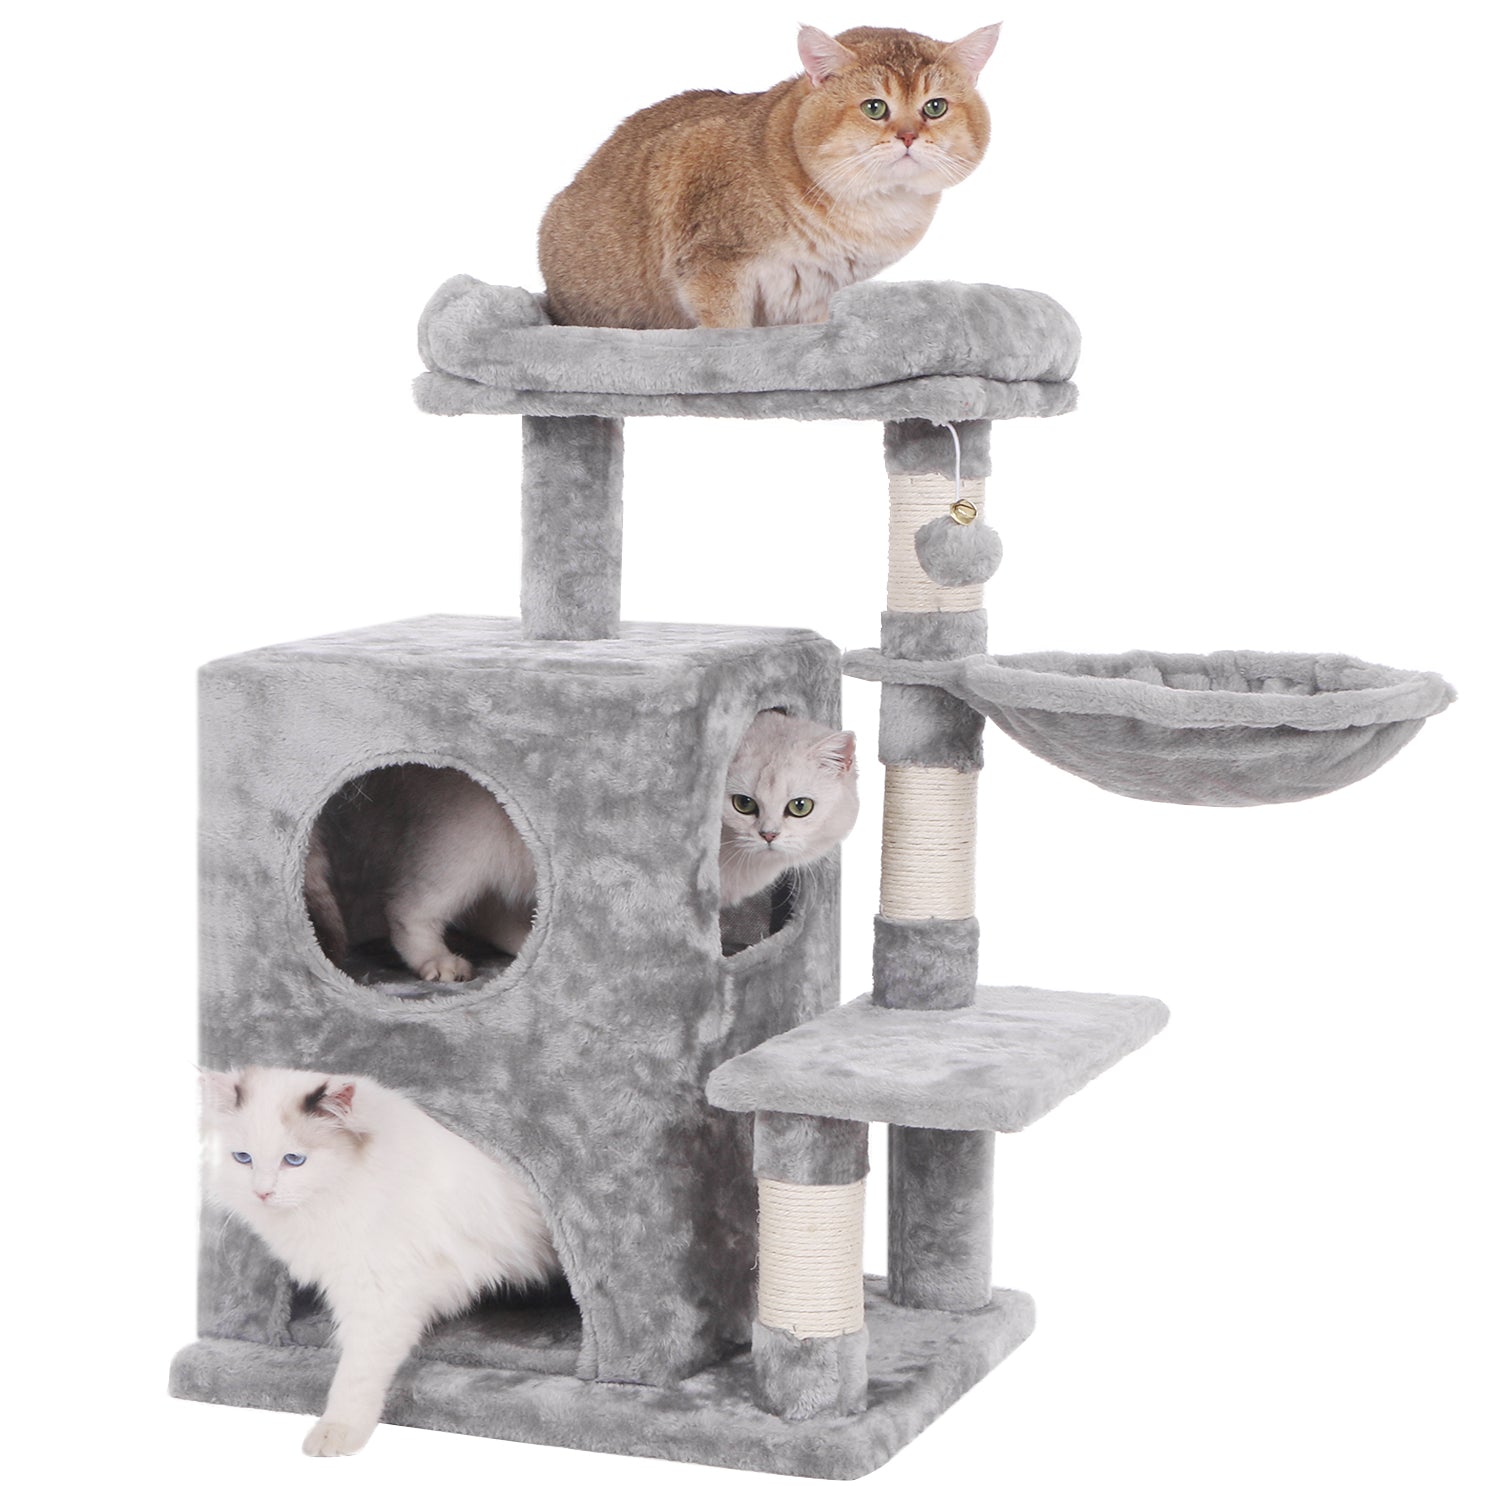 BEWISHOME Cat Tree Condo with Sisal Scratching Posts, Plush Perch, Dual Houses and Basket, Cat Tower Furniture Kitty Activity Center Kitten Play House MMJ06L